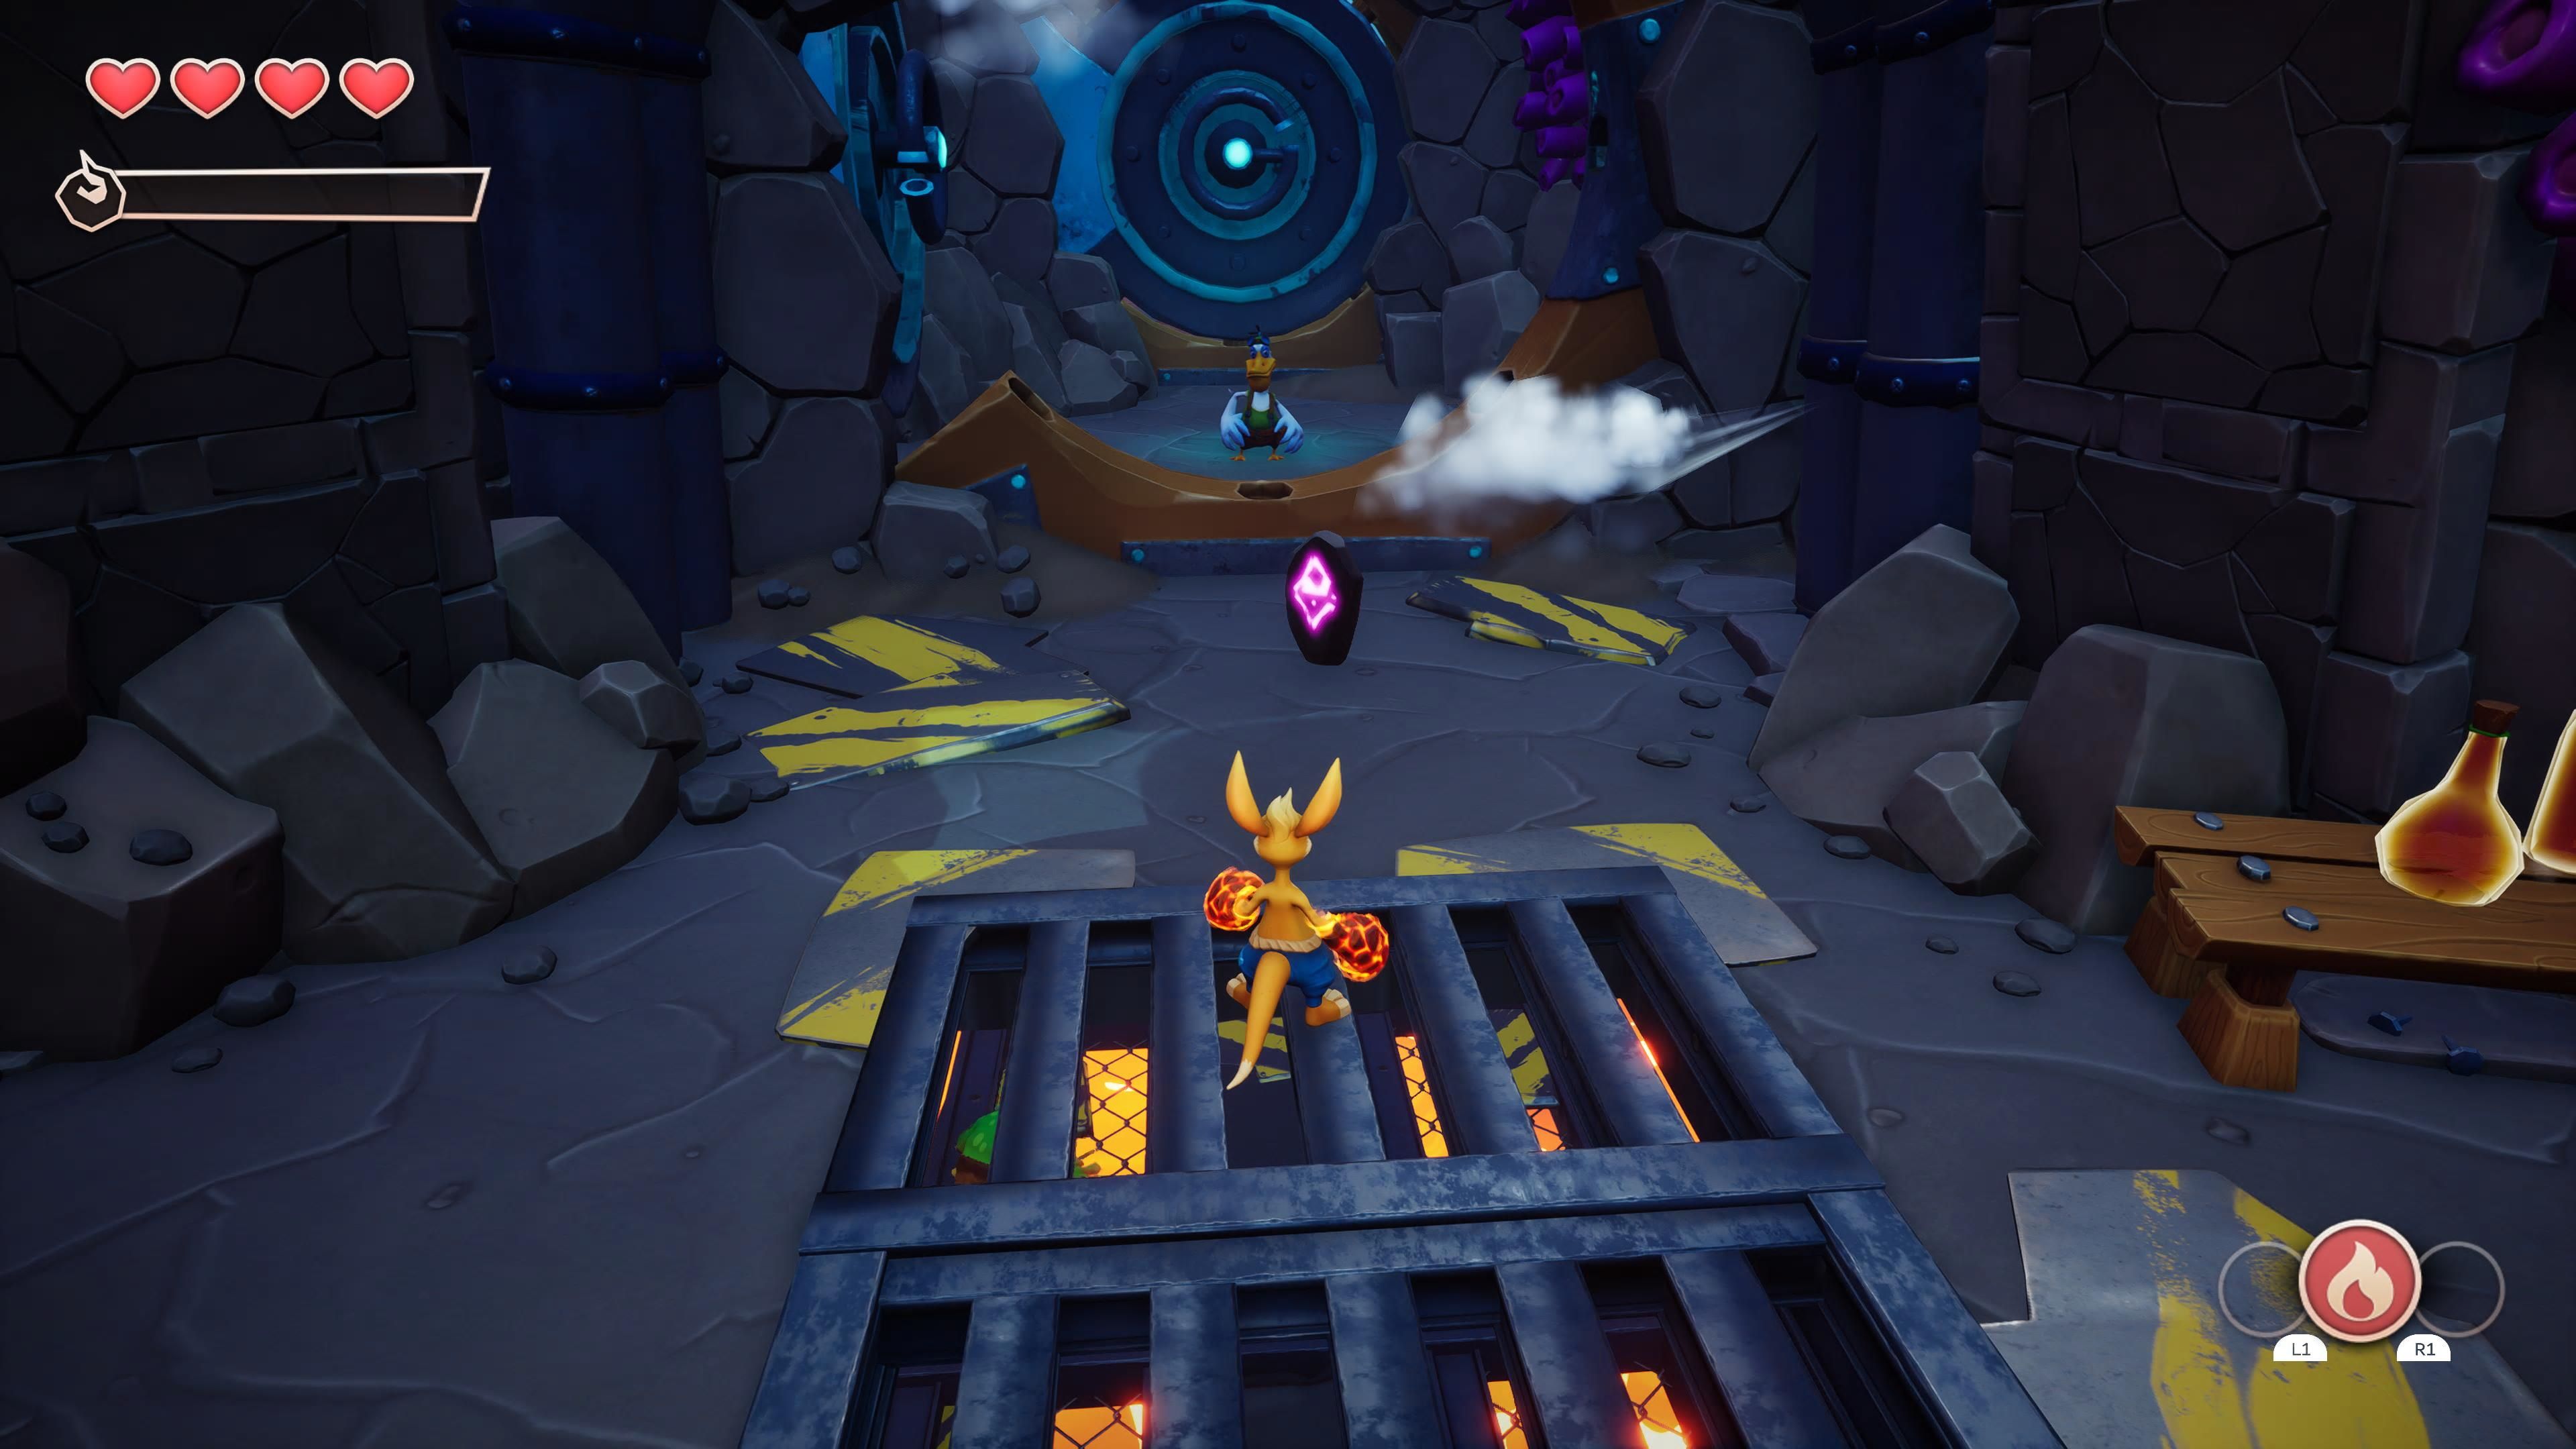 The final rune in the Lava Caves